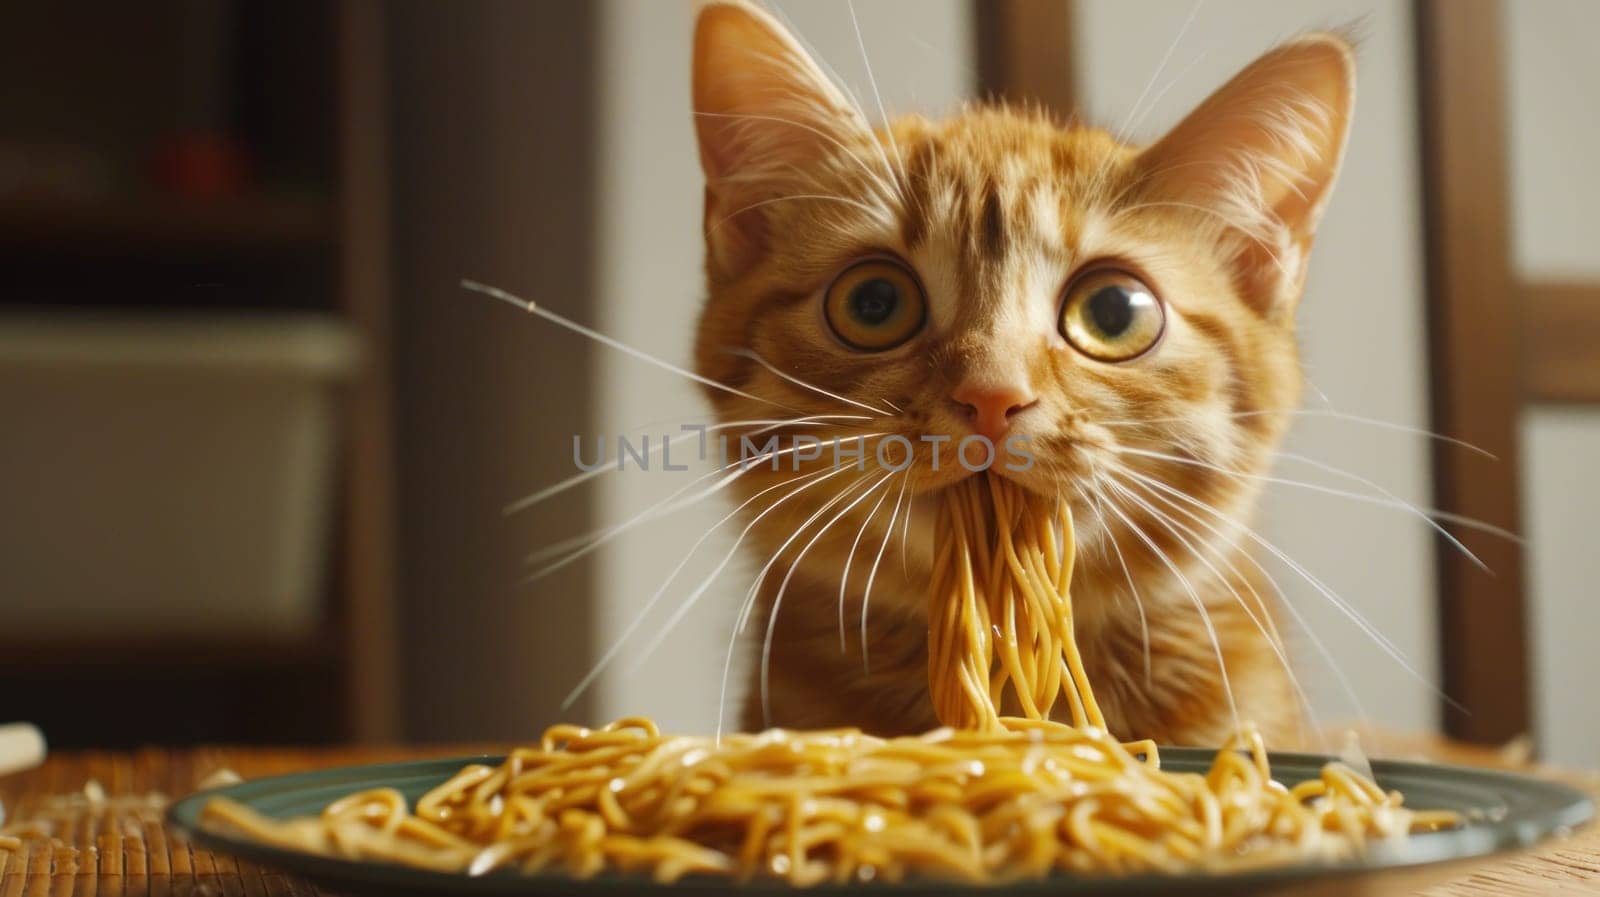 A cat is eating spaghetti on a plate. The cat is orange and has a curious expression on its face